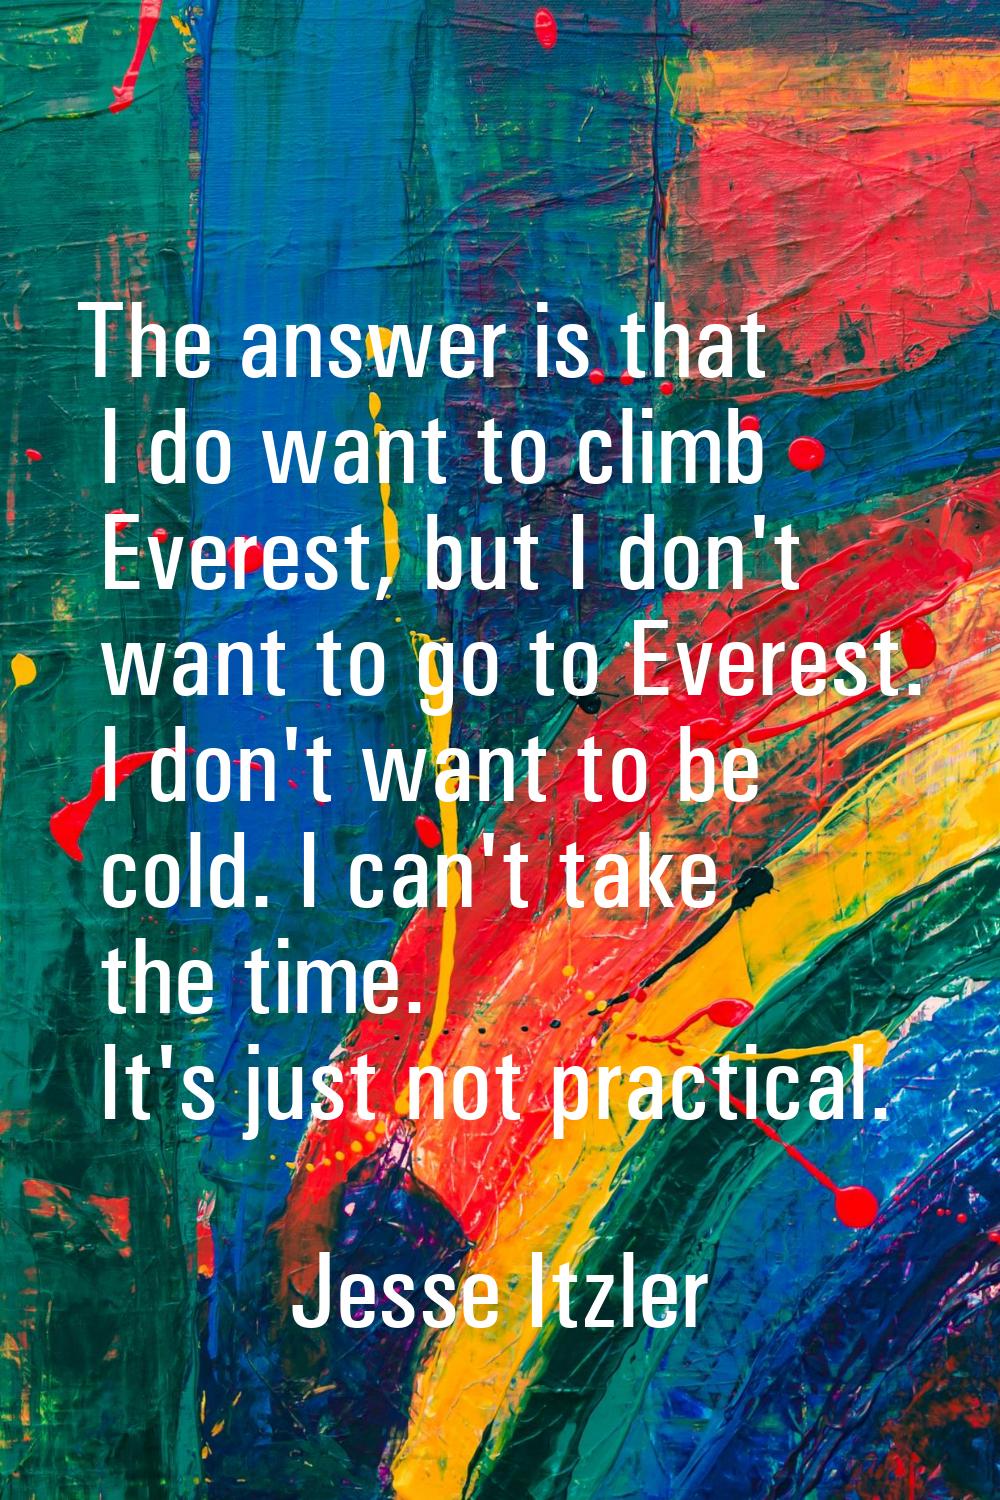 The answer is that I do want to climb Everest, but I don't want to go to Everest. I don't want to b